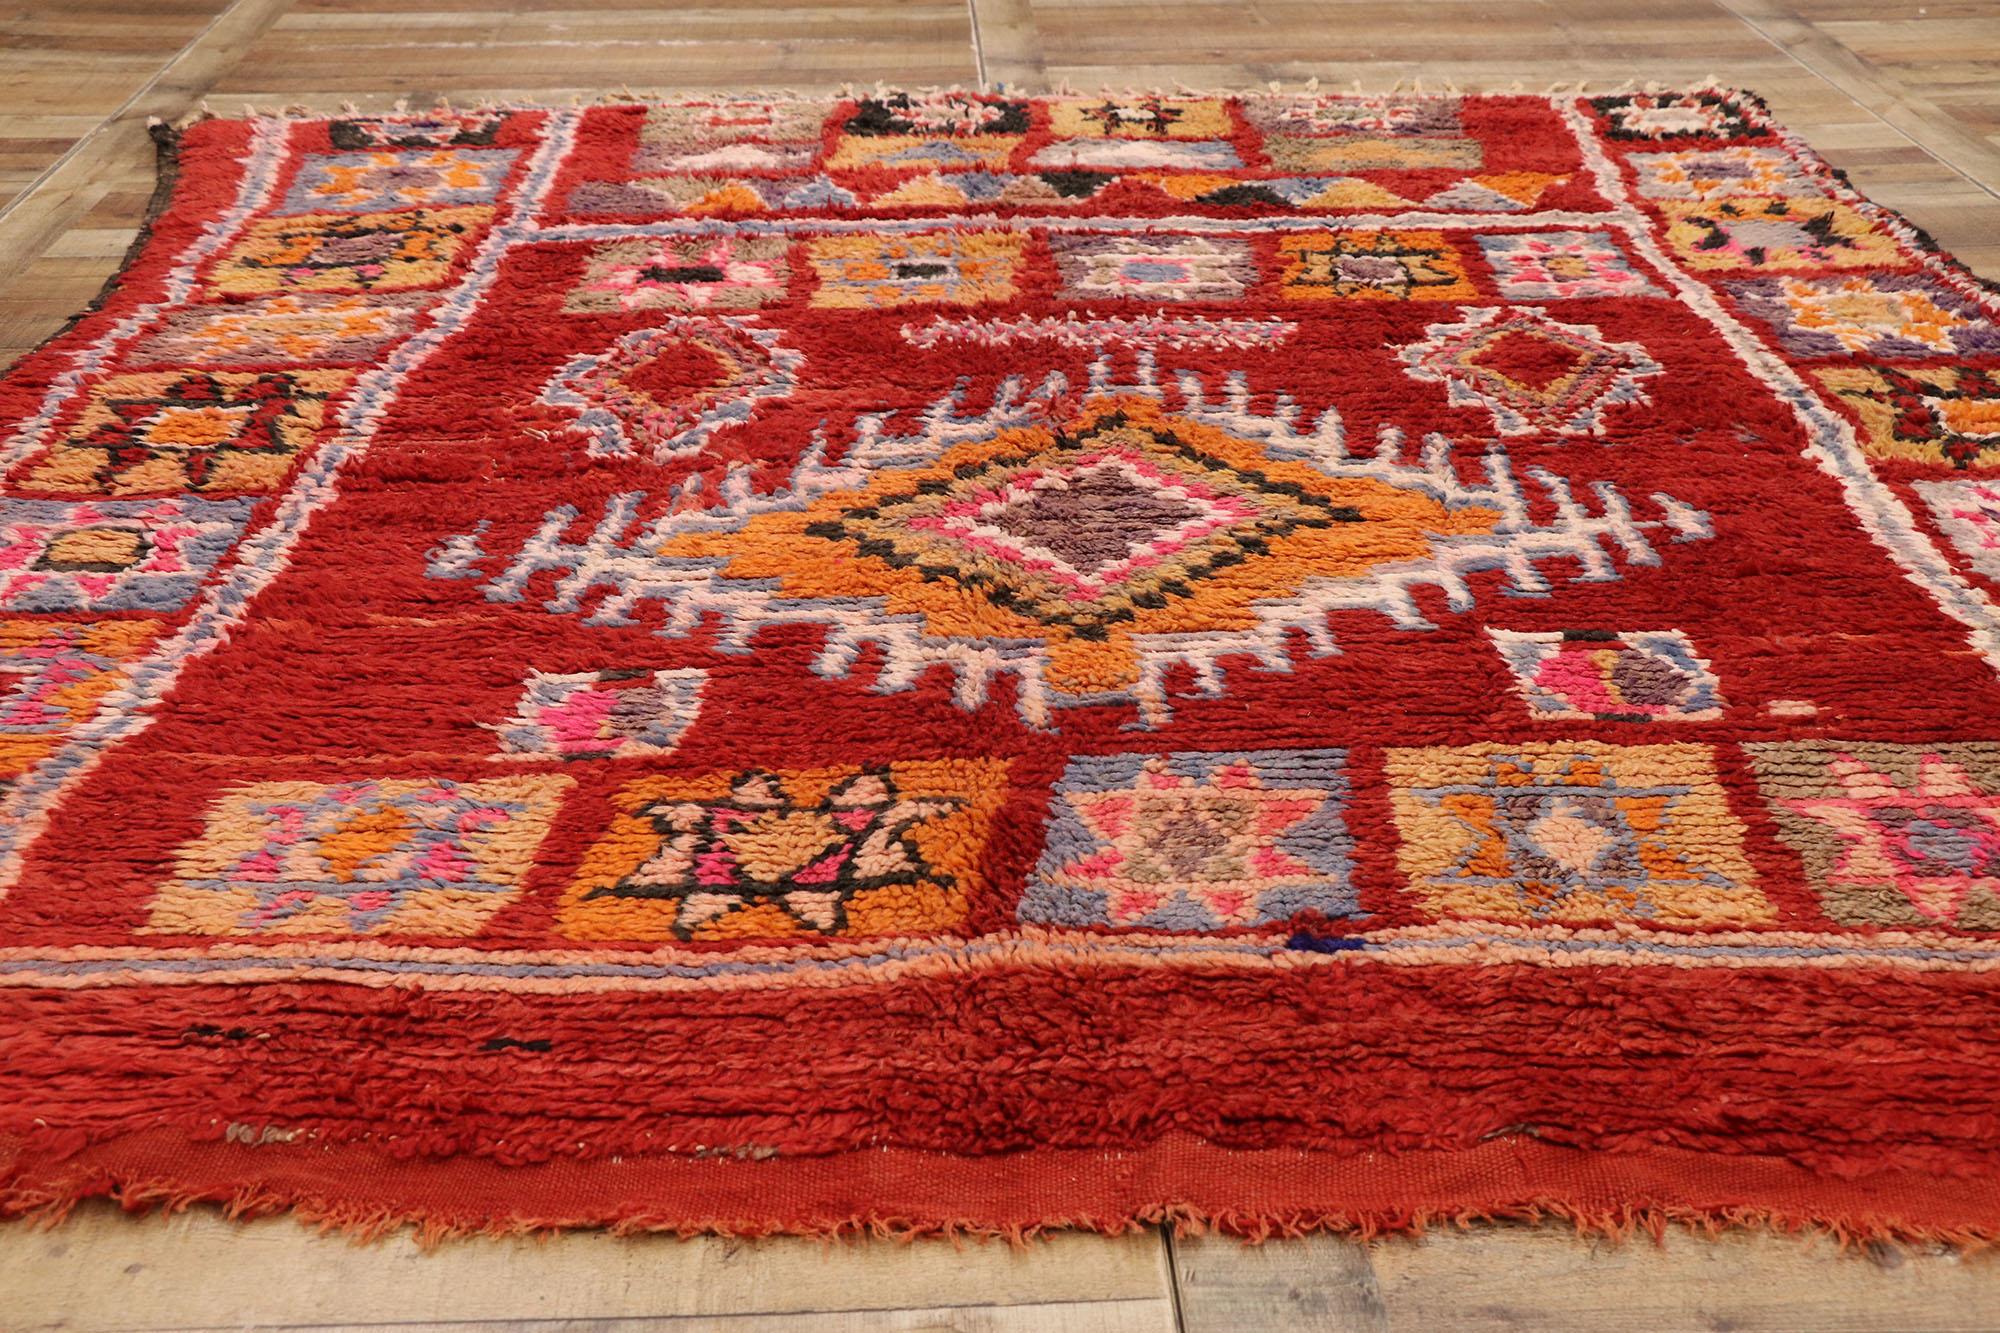 Wool Vintage Berber Moroccan Rug with Boho Chic Tribal Artisan Style For Sale